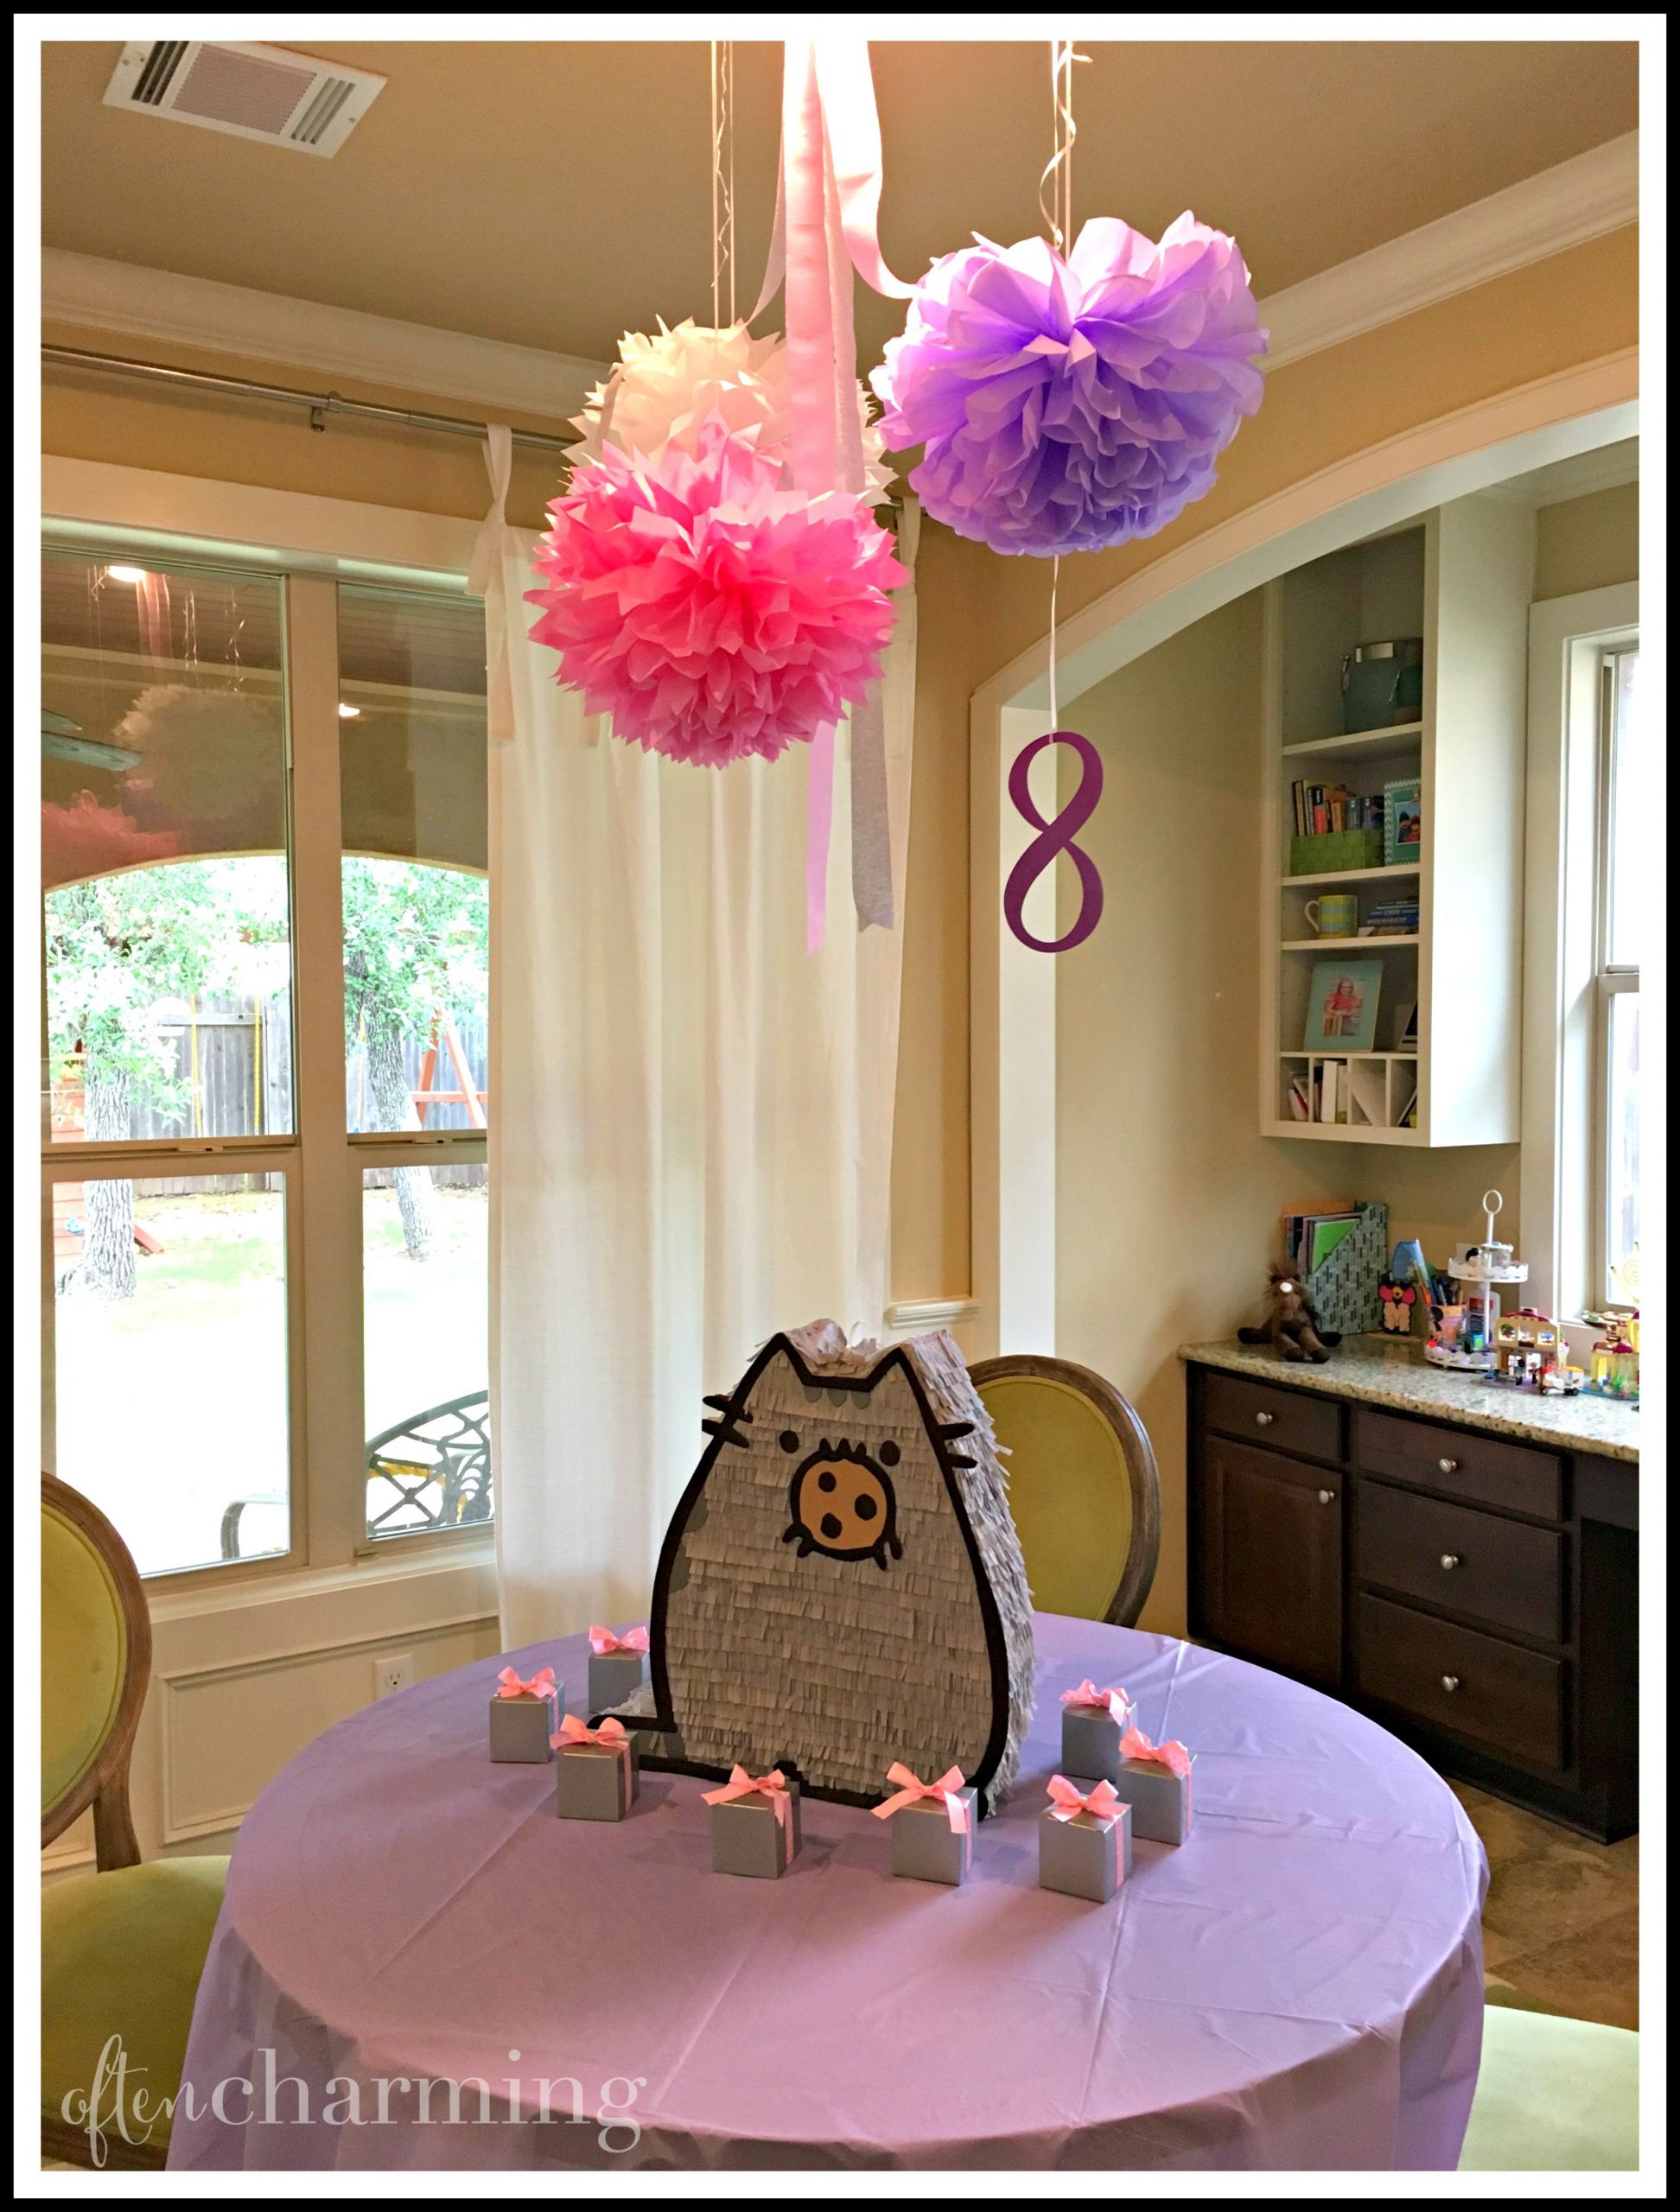 Pusheen Birthday Party Ideas
 Pusheen the Cat Party